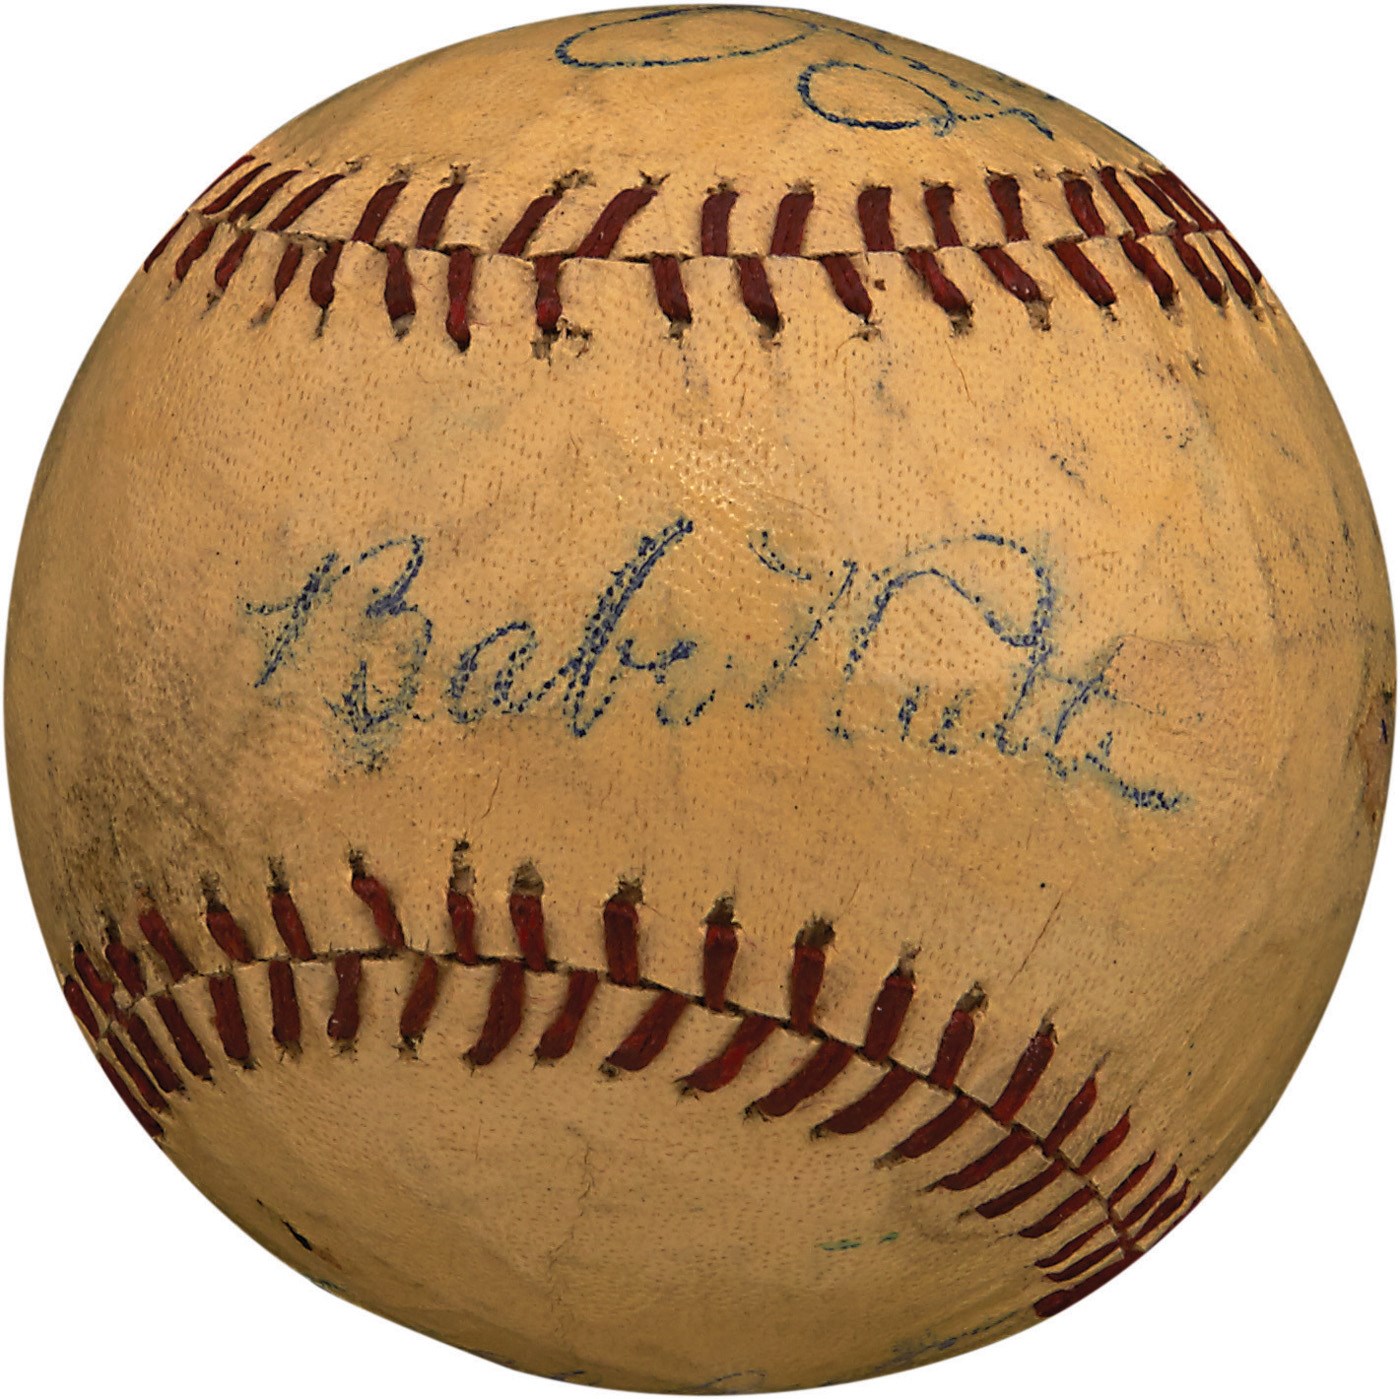 - 1928-29 New York Yankees Team-Signed Baseball with Proof of Signing (PSA)